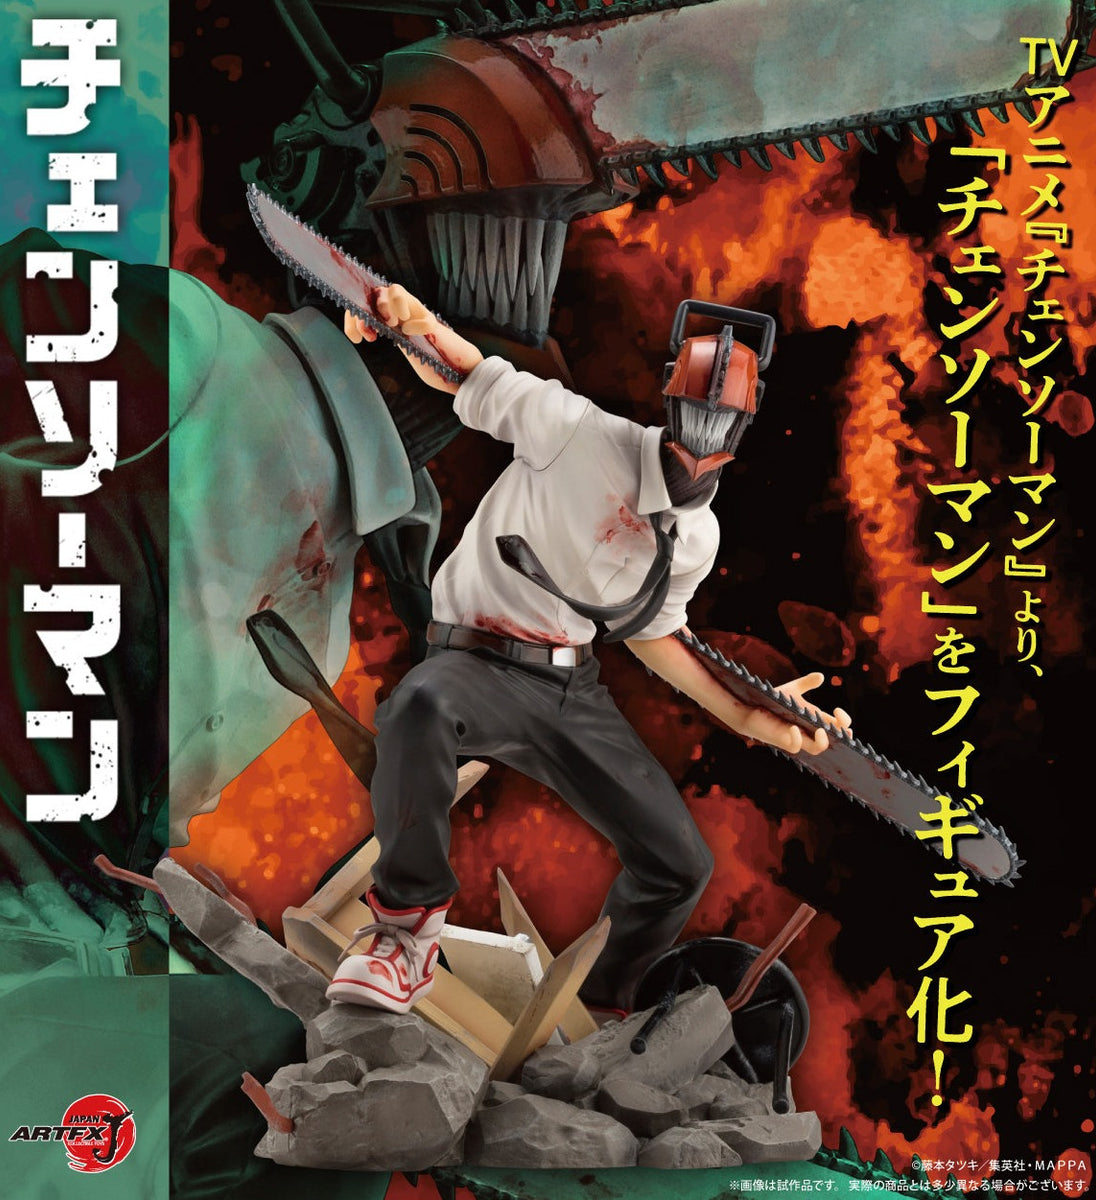 Chainsaw Man Anime Pop-Up Shop Exhibits Life-Sized Power Figure